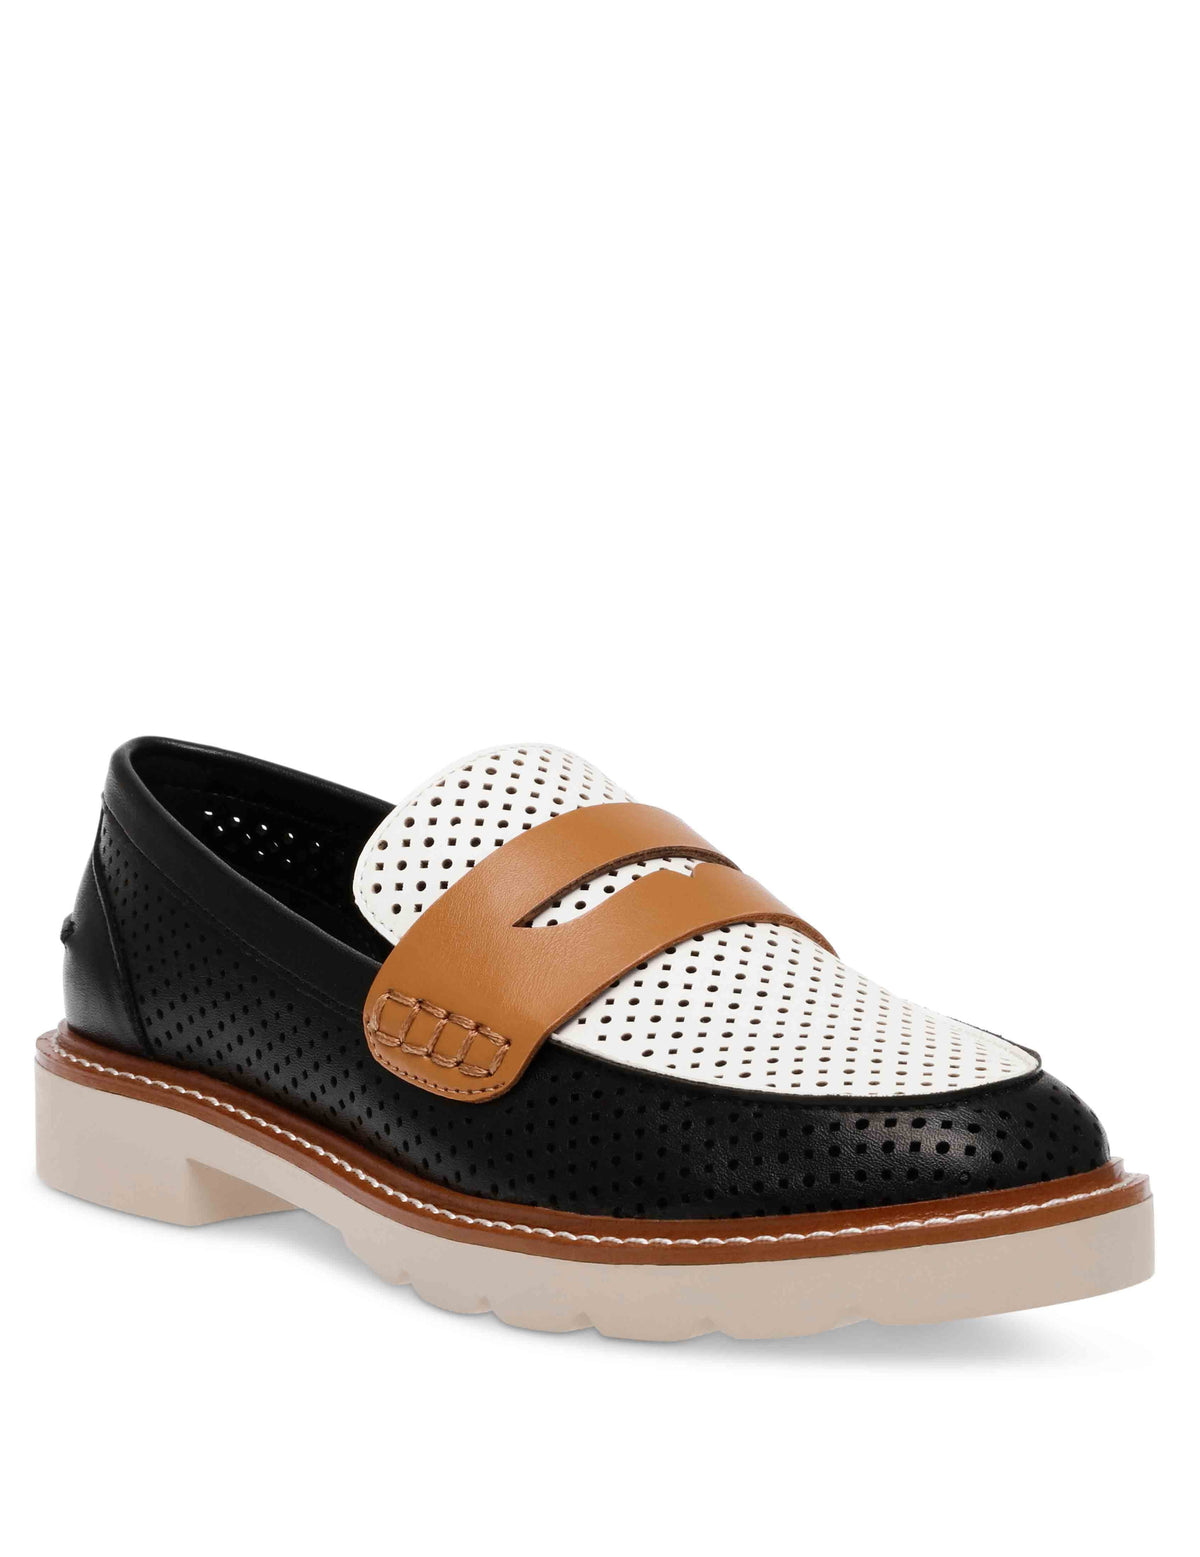 Anne Klein Black/White/ Cognac Perforated Emmylou Perforated Loafer